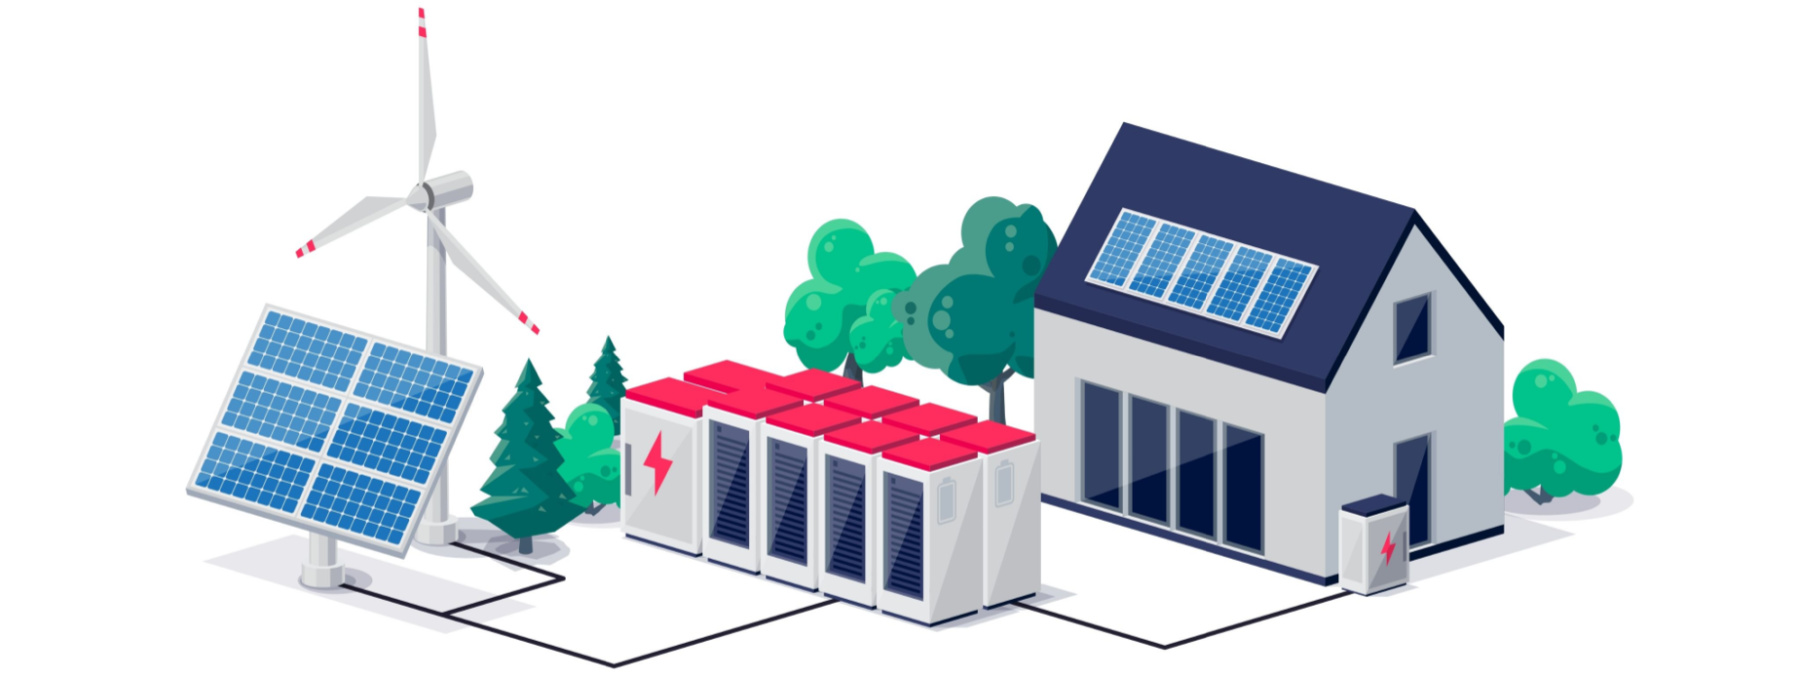 Expensive Electricity: An Opportunity for Battery Systems